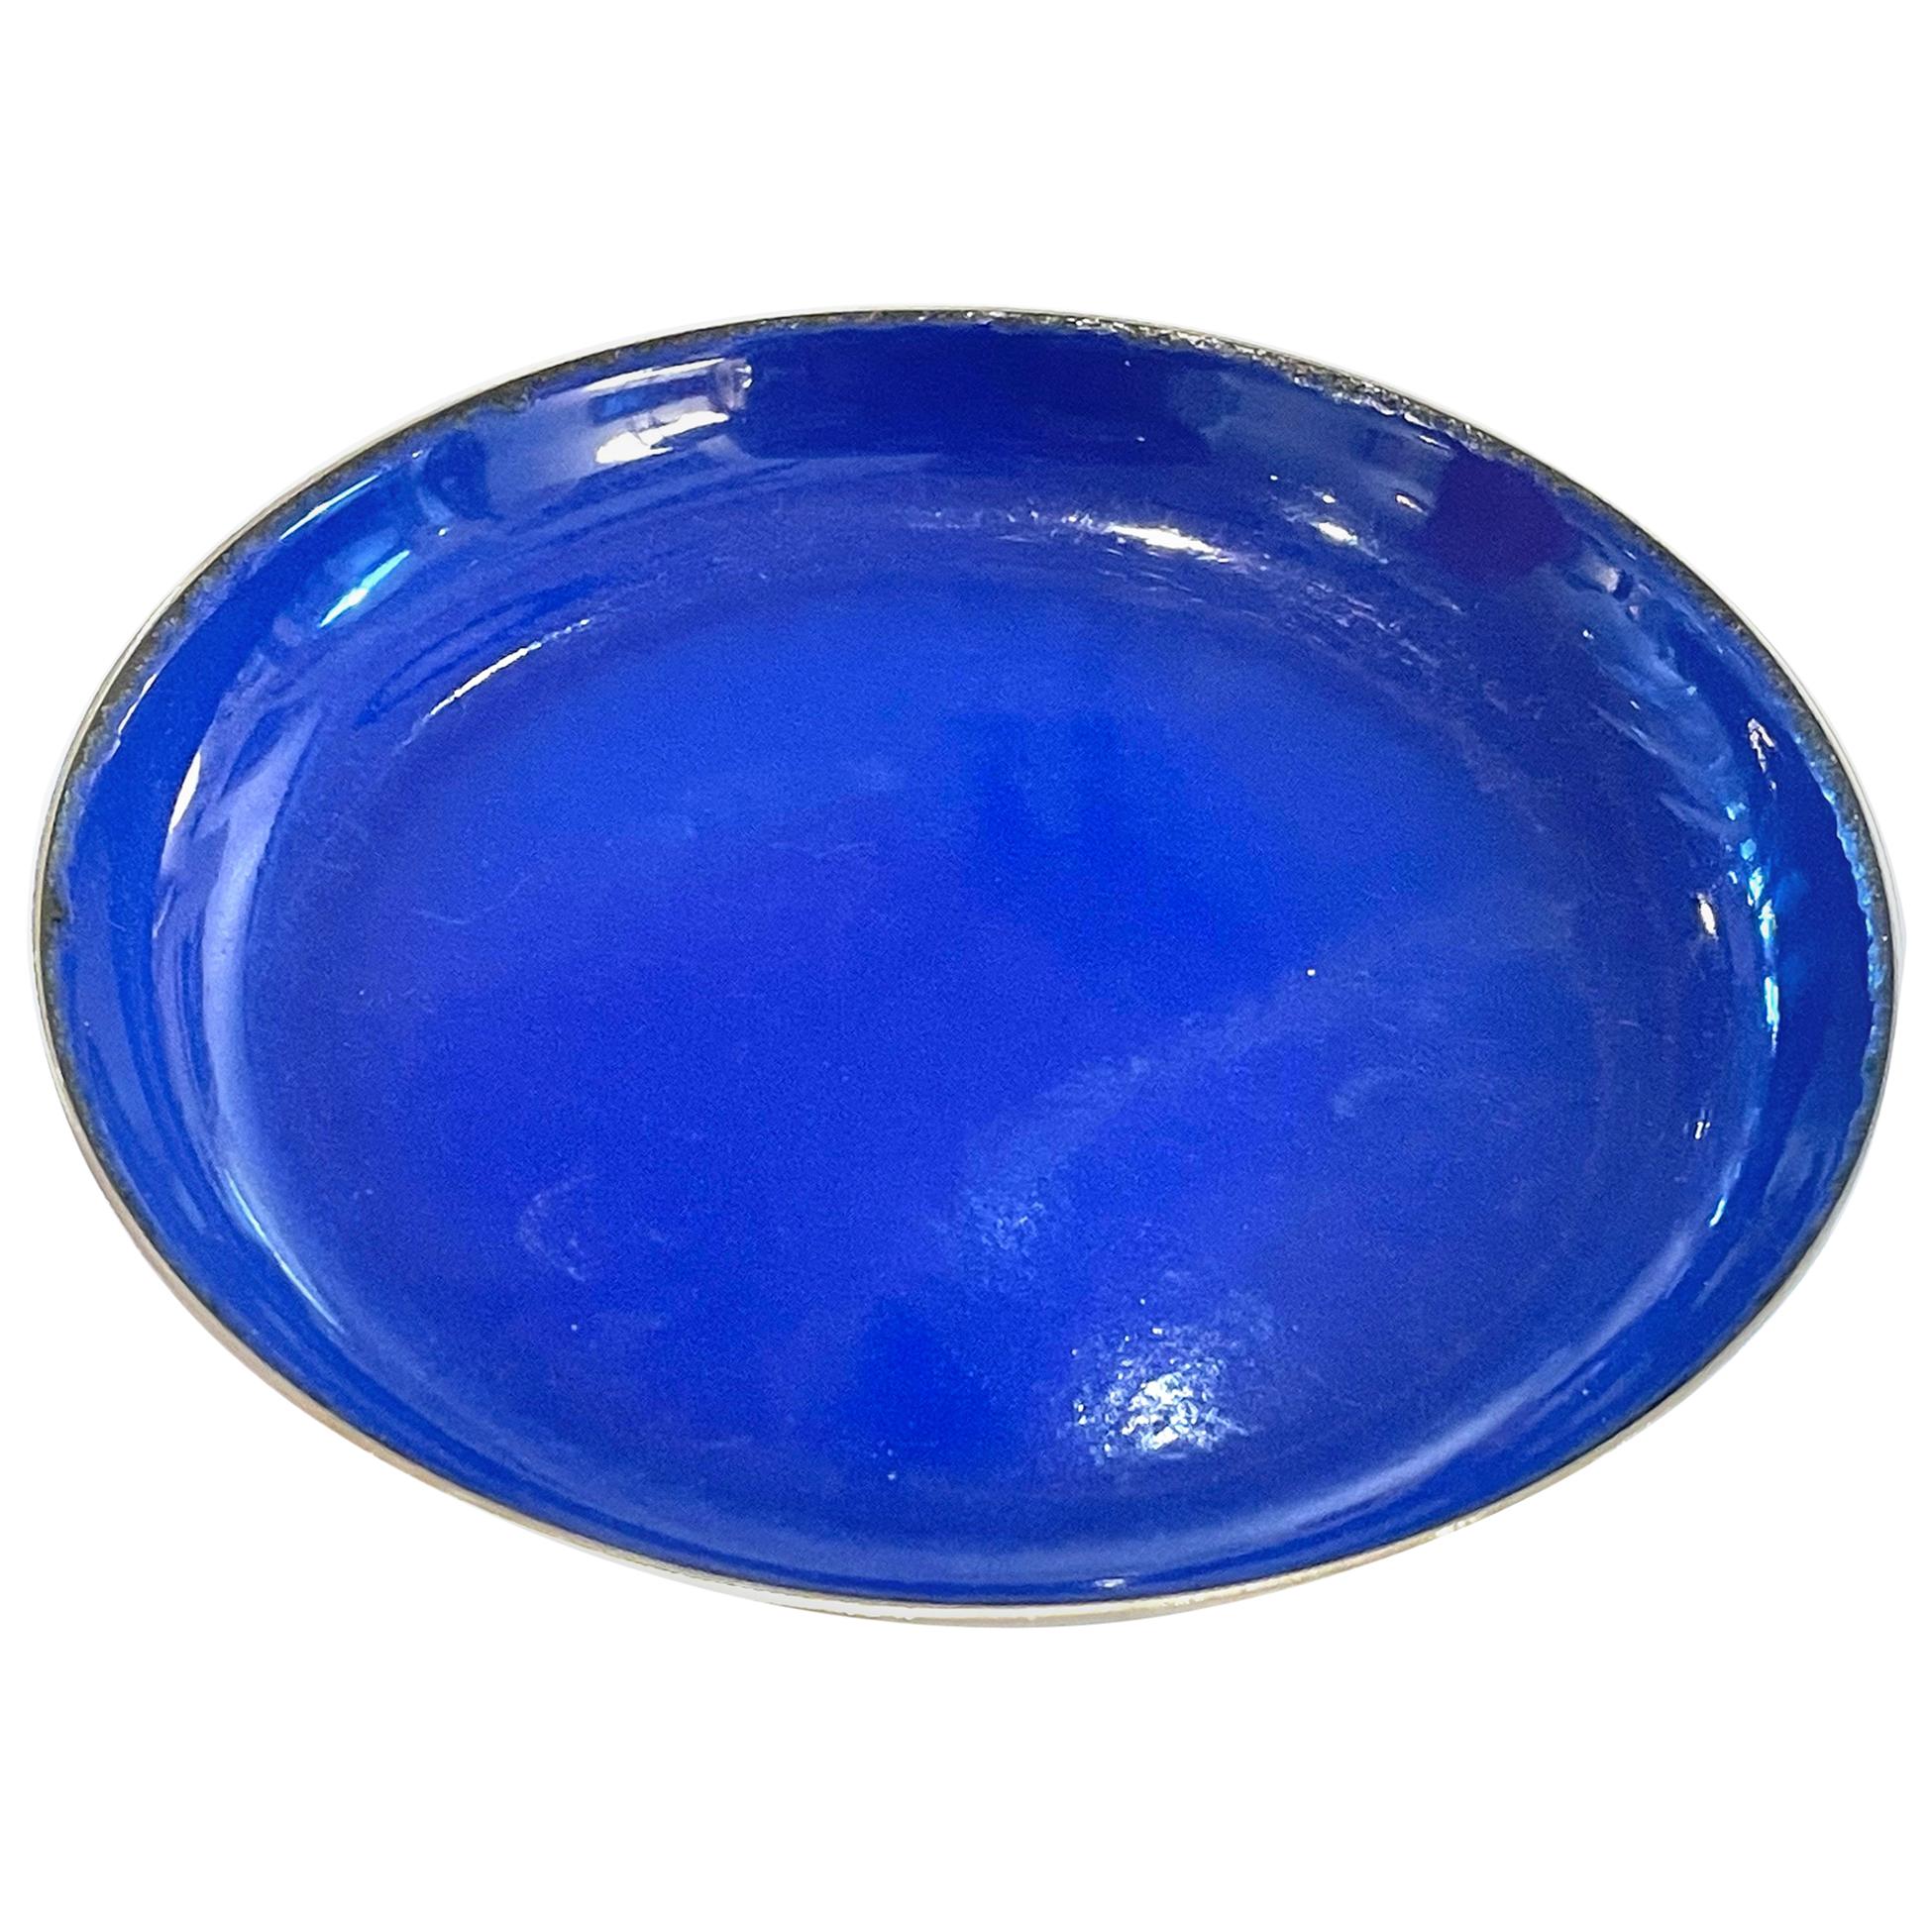 Polished Stainless Steel and Navy Blue Enamel Low Bowl by Catherine Holm